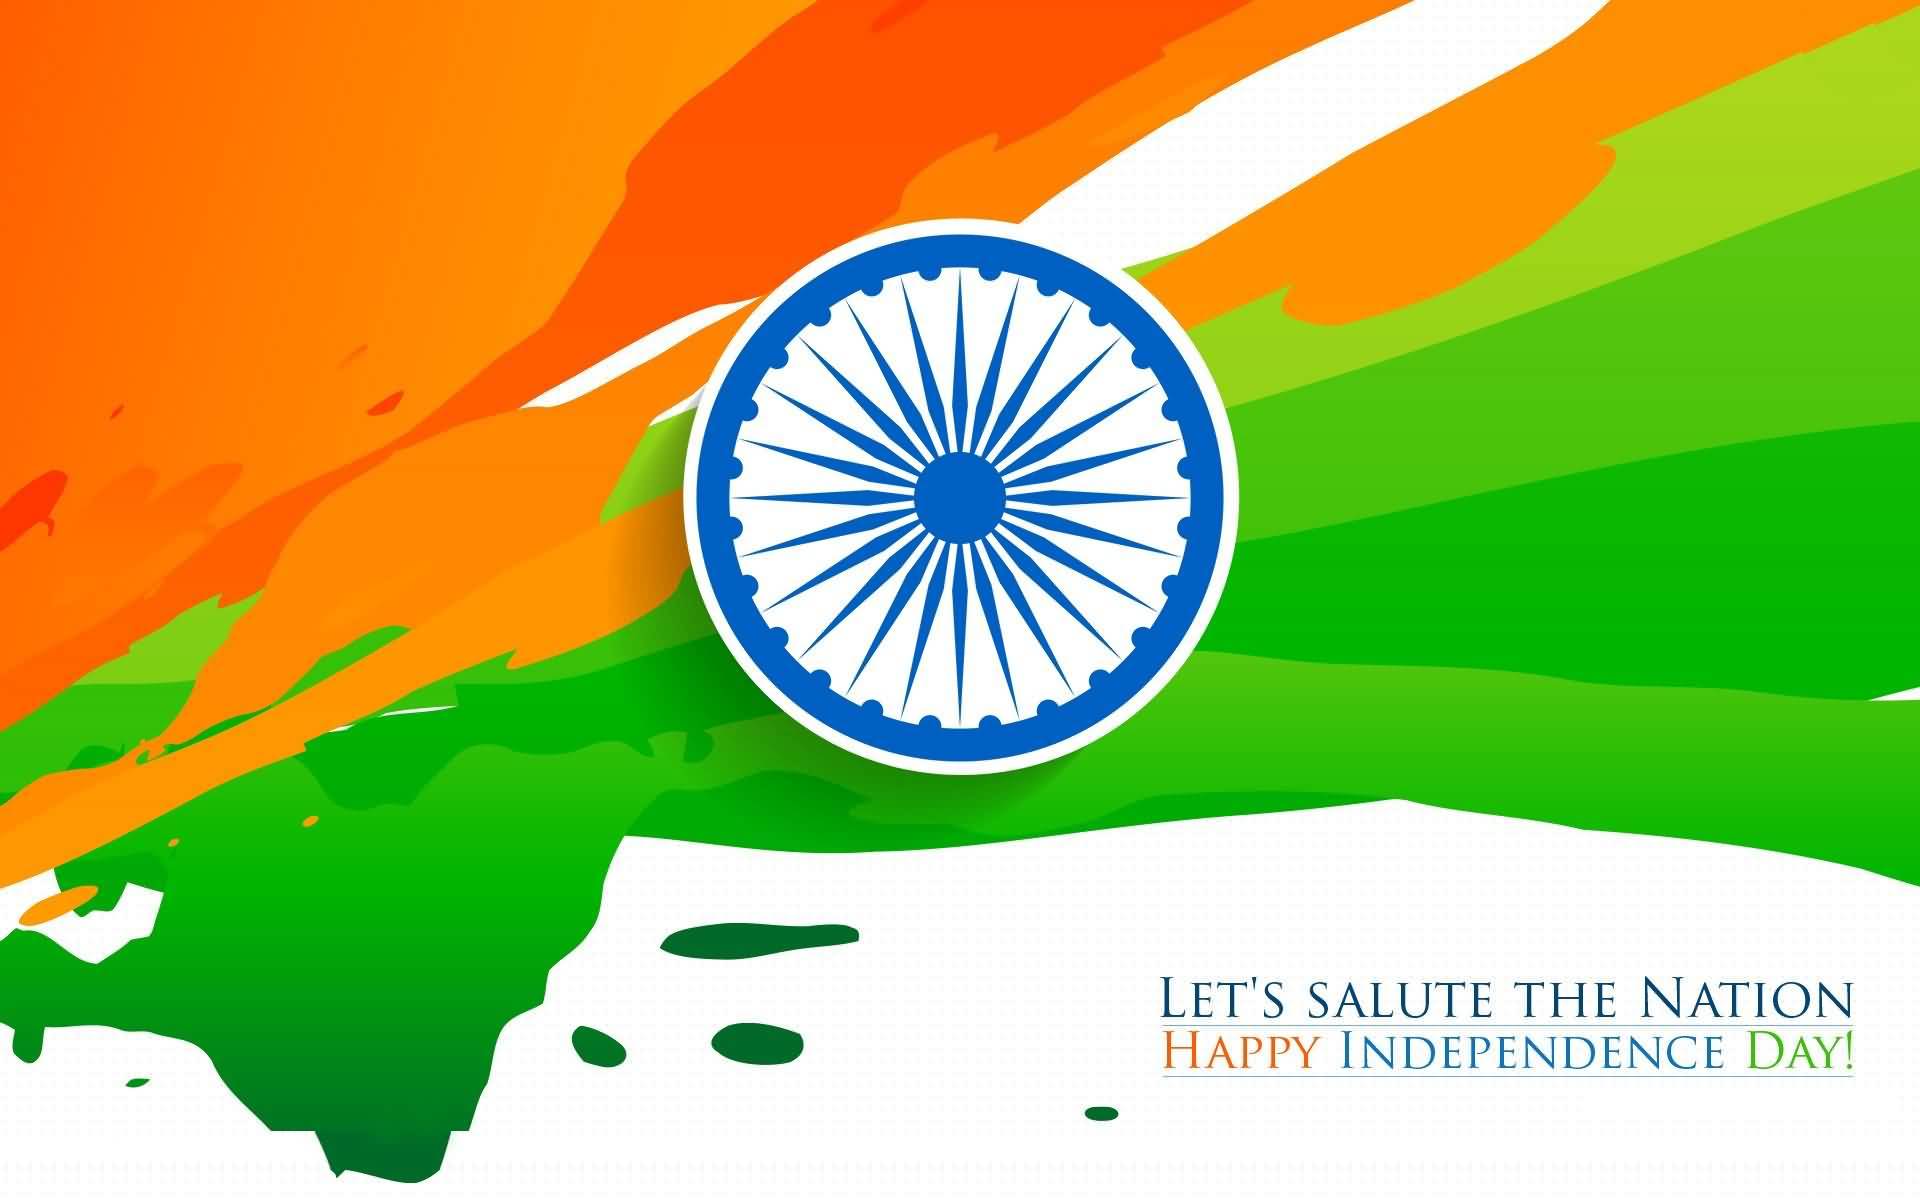 Let's Salute The Nation Happy Independence Day